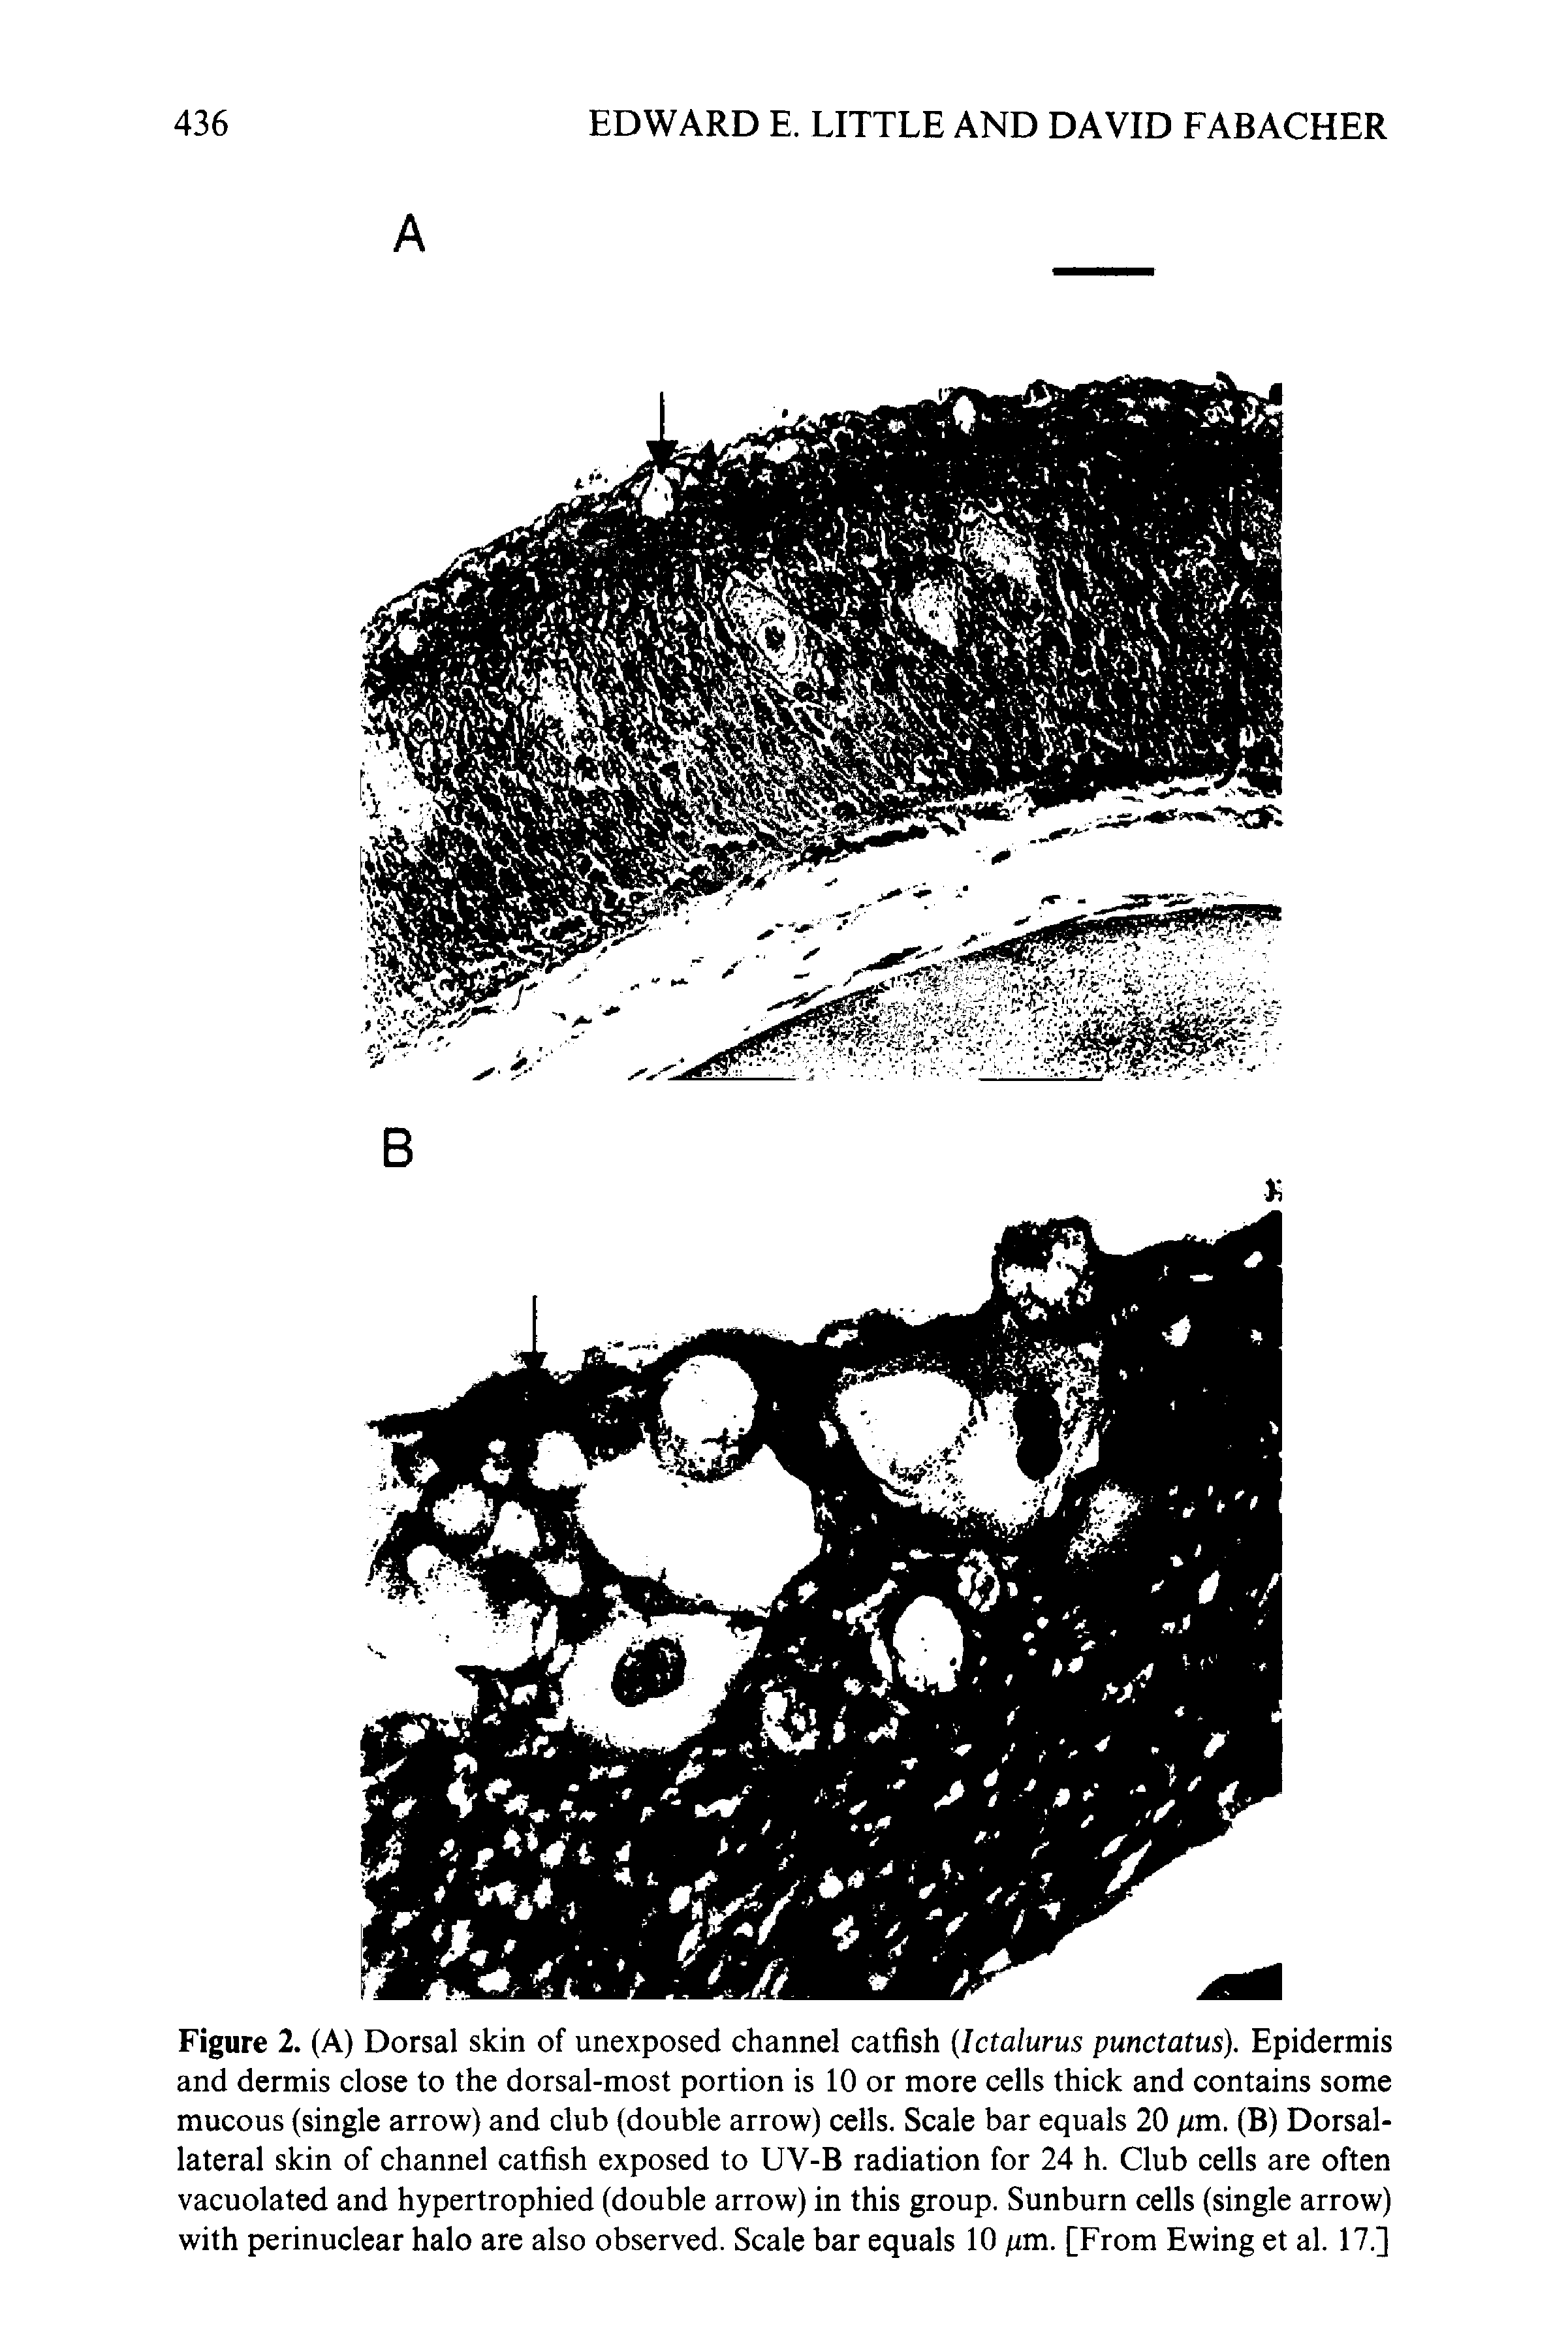 Figure 2. (A) Dorsal skin of unexposed channel catfish [Ictalurus punctatus). Epidermis and dermis close to the dorsal-most portion is 10 or more cells thick and contains some mucous (single arrow) and club (double arrow) cells. Scale bar equals 20 pm. (B) Dorsal-lateral skin of channel catfish exposed to UV-B radiation for 24 h. Club cells are often vacuolated and hypertrophied (double arrow) in this group. Sunburn cells (single arrow) with perinuclear halo are also observed. Scale bar equals 10 pm. [From Ewing et al. 17.]...